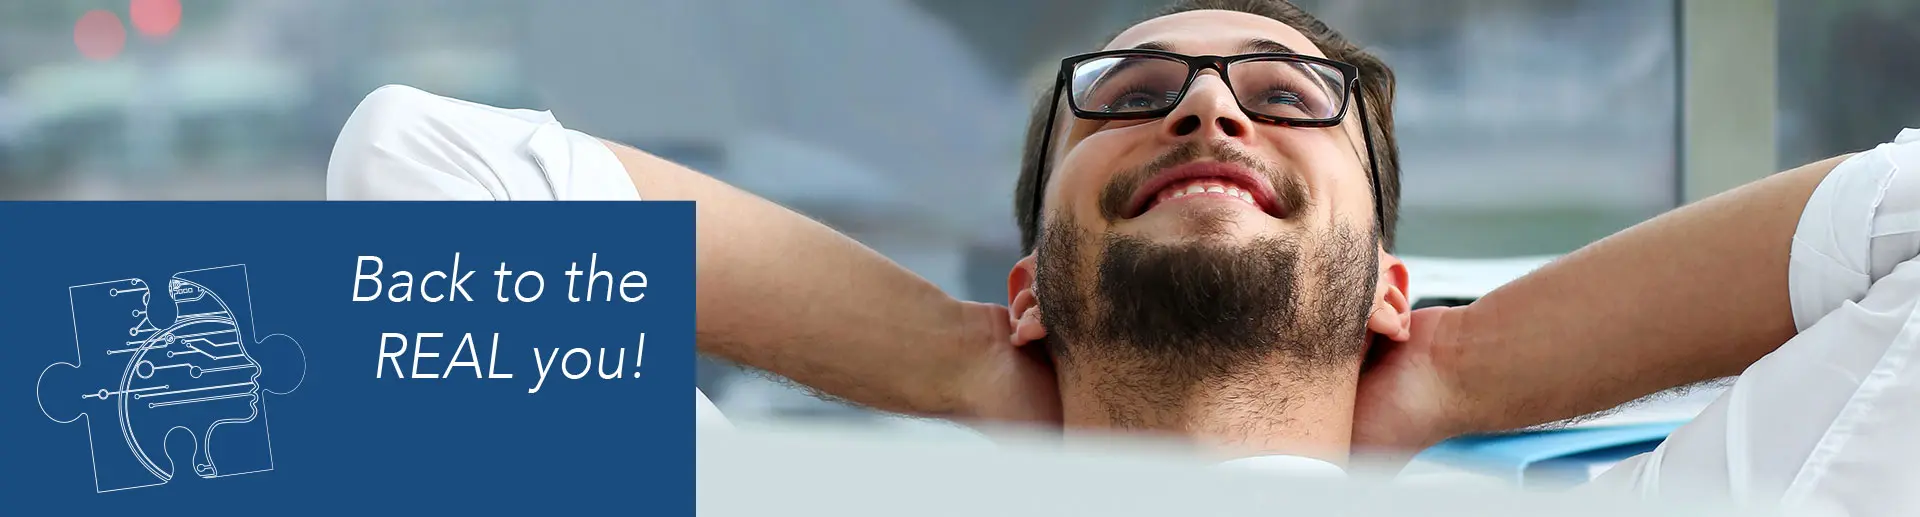 MAN RELAXING WITH HEAD BACK ON HANDS, SMILING